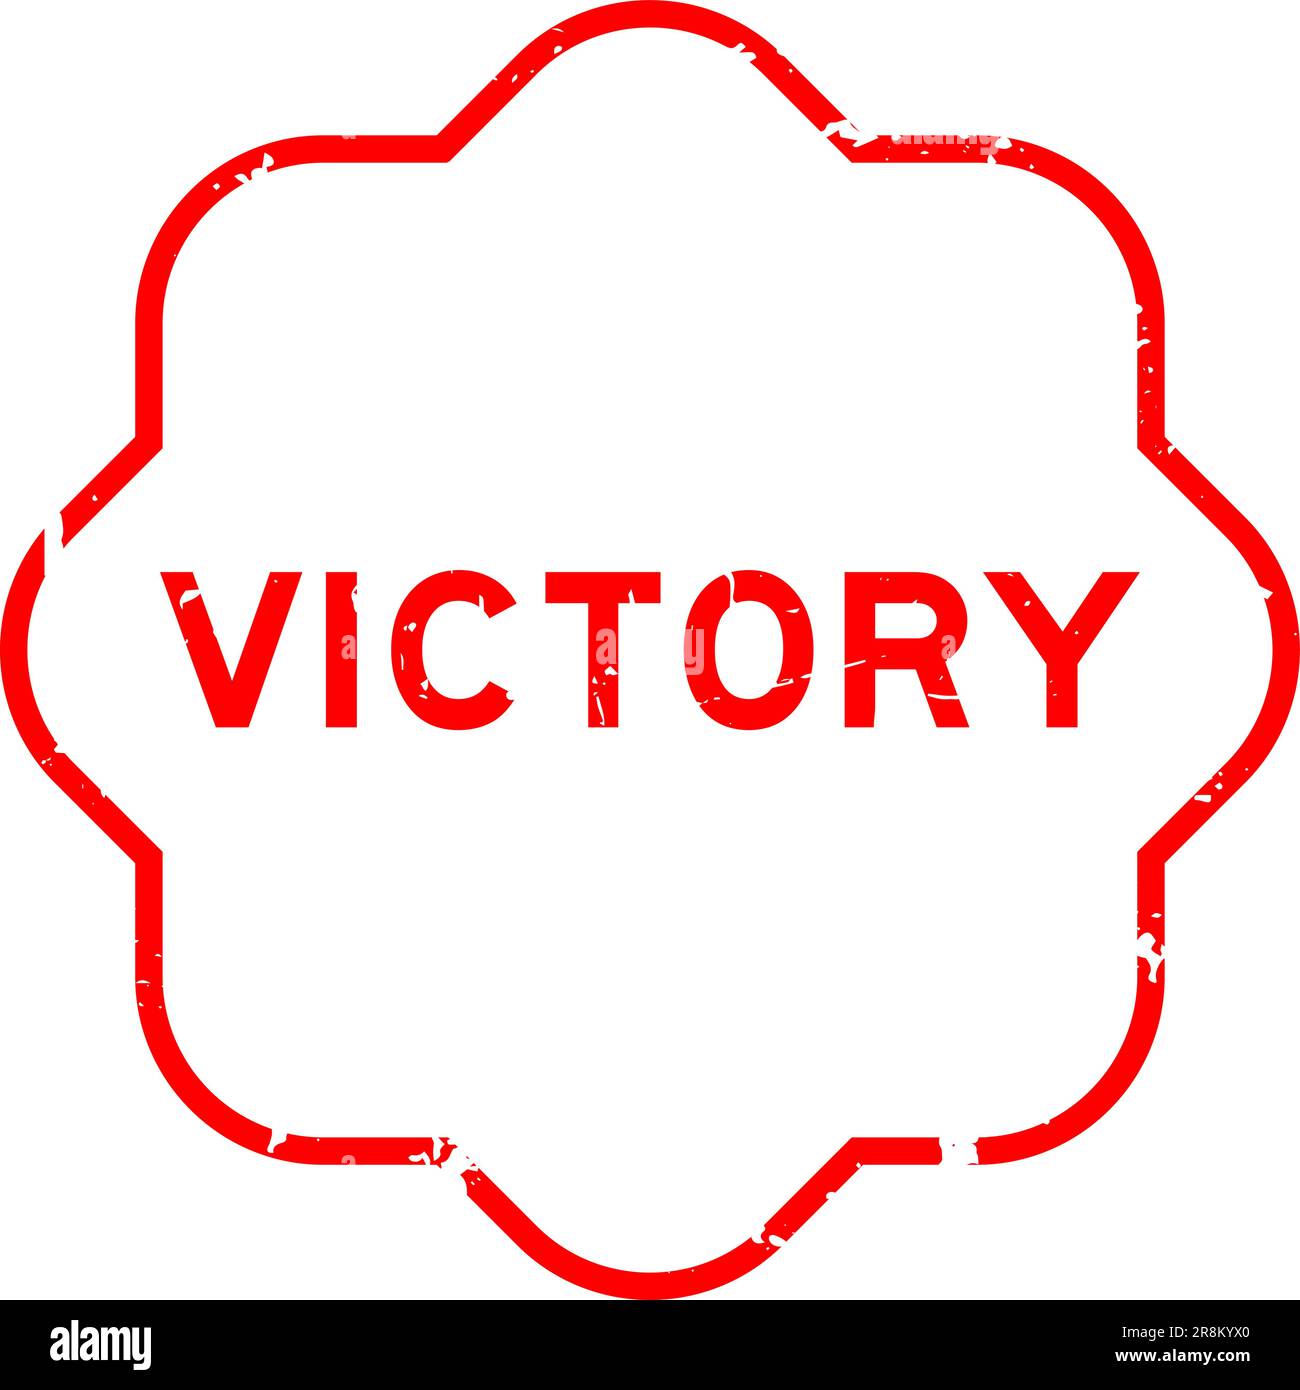 Grunge red victory word rubber seal stamp on white background Stock Vector